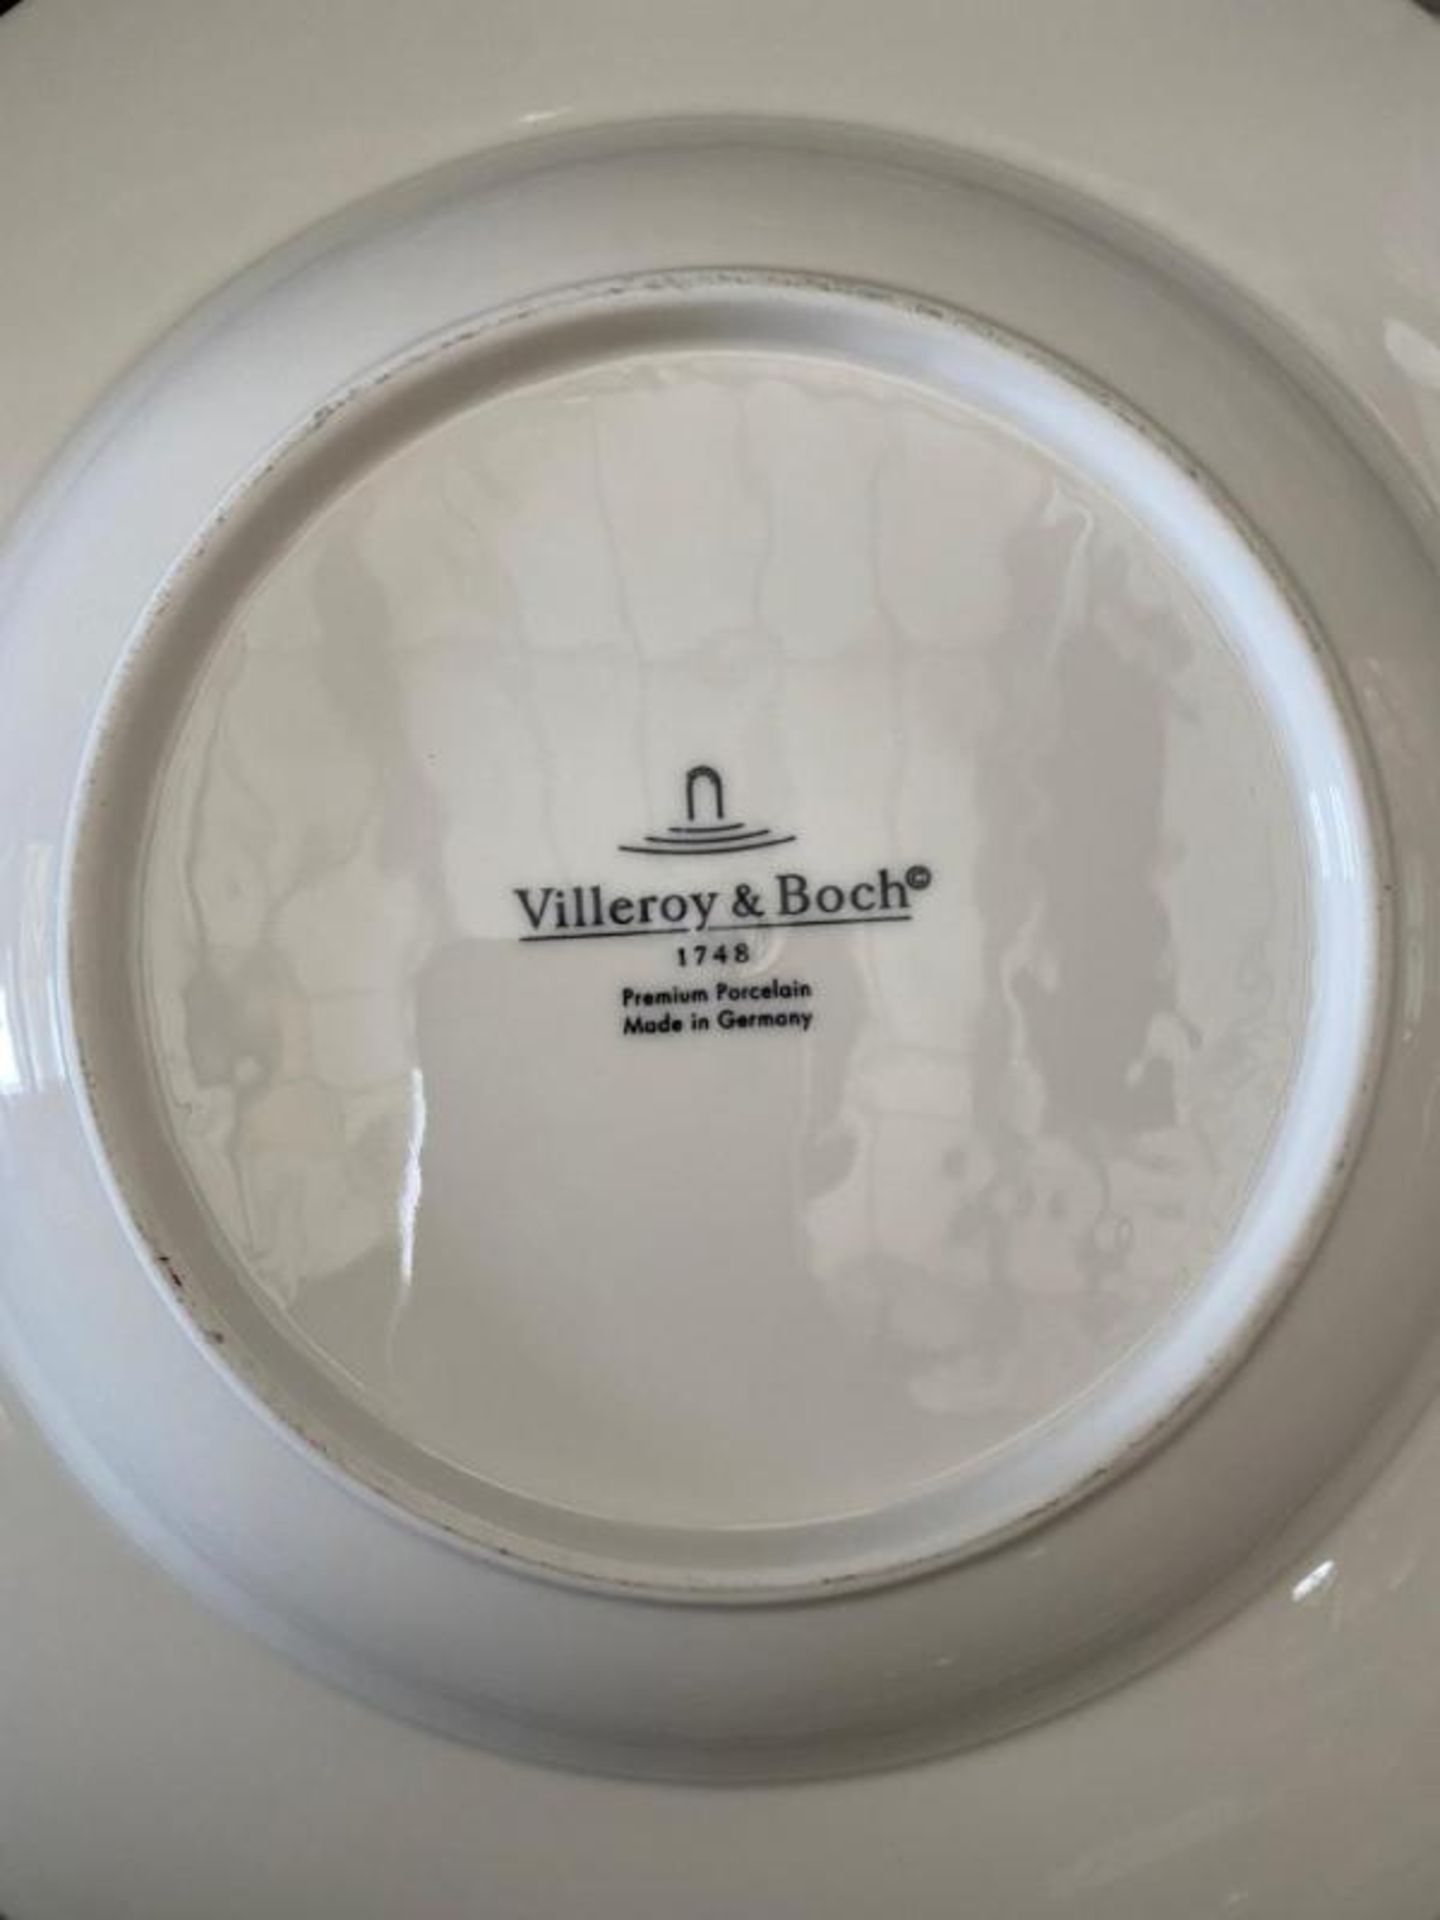 10 x Villeroy & Boch Royal Dinner Plate -290mm (29cm) - Ref: 1044122620 - New and unused withou - Image 3 of 5